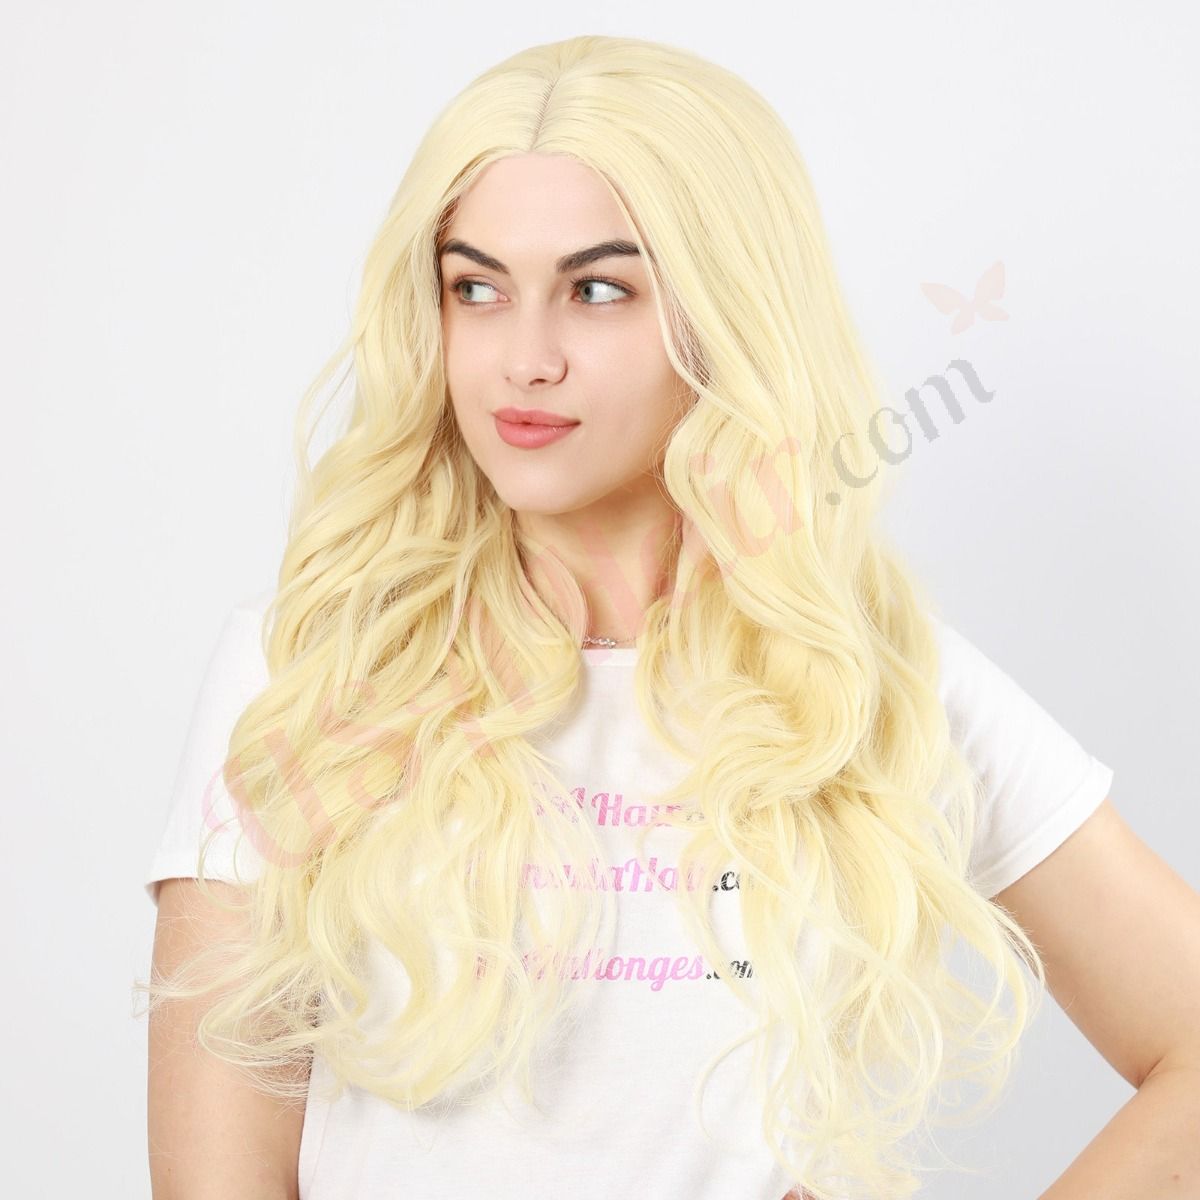 Blonde Wigs - Affordable Remy Human Hair Blonde Wigs in USA